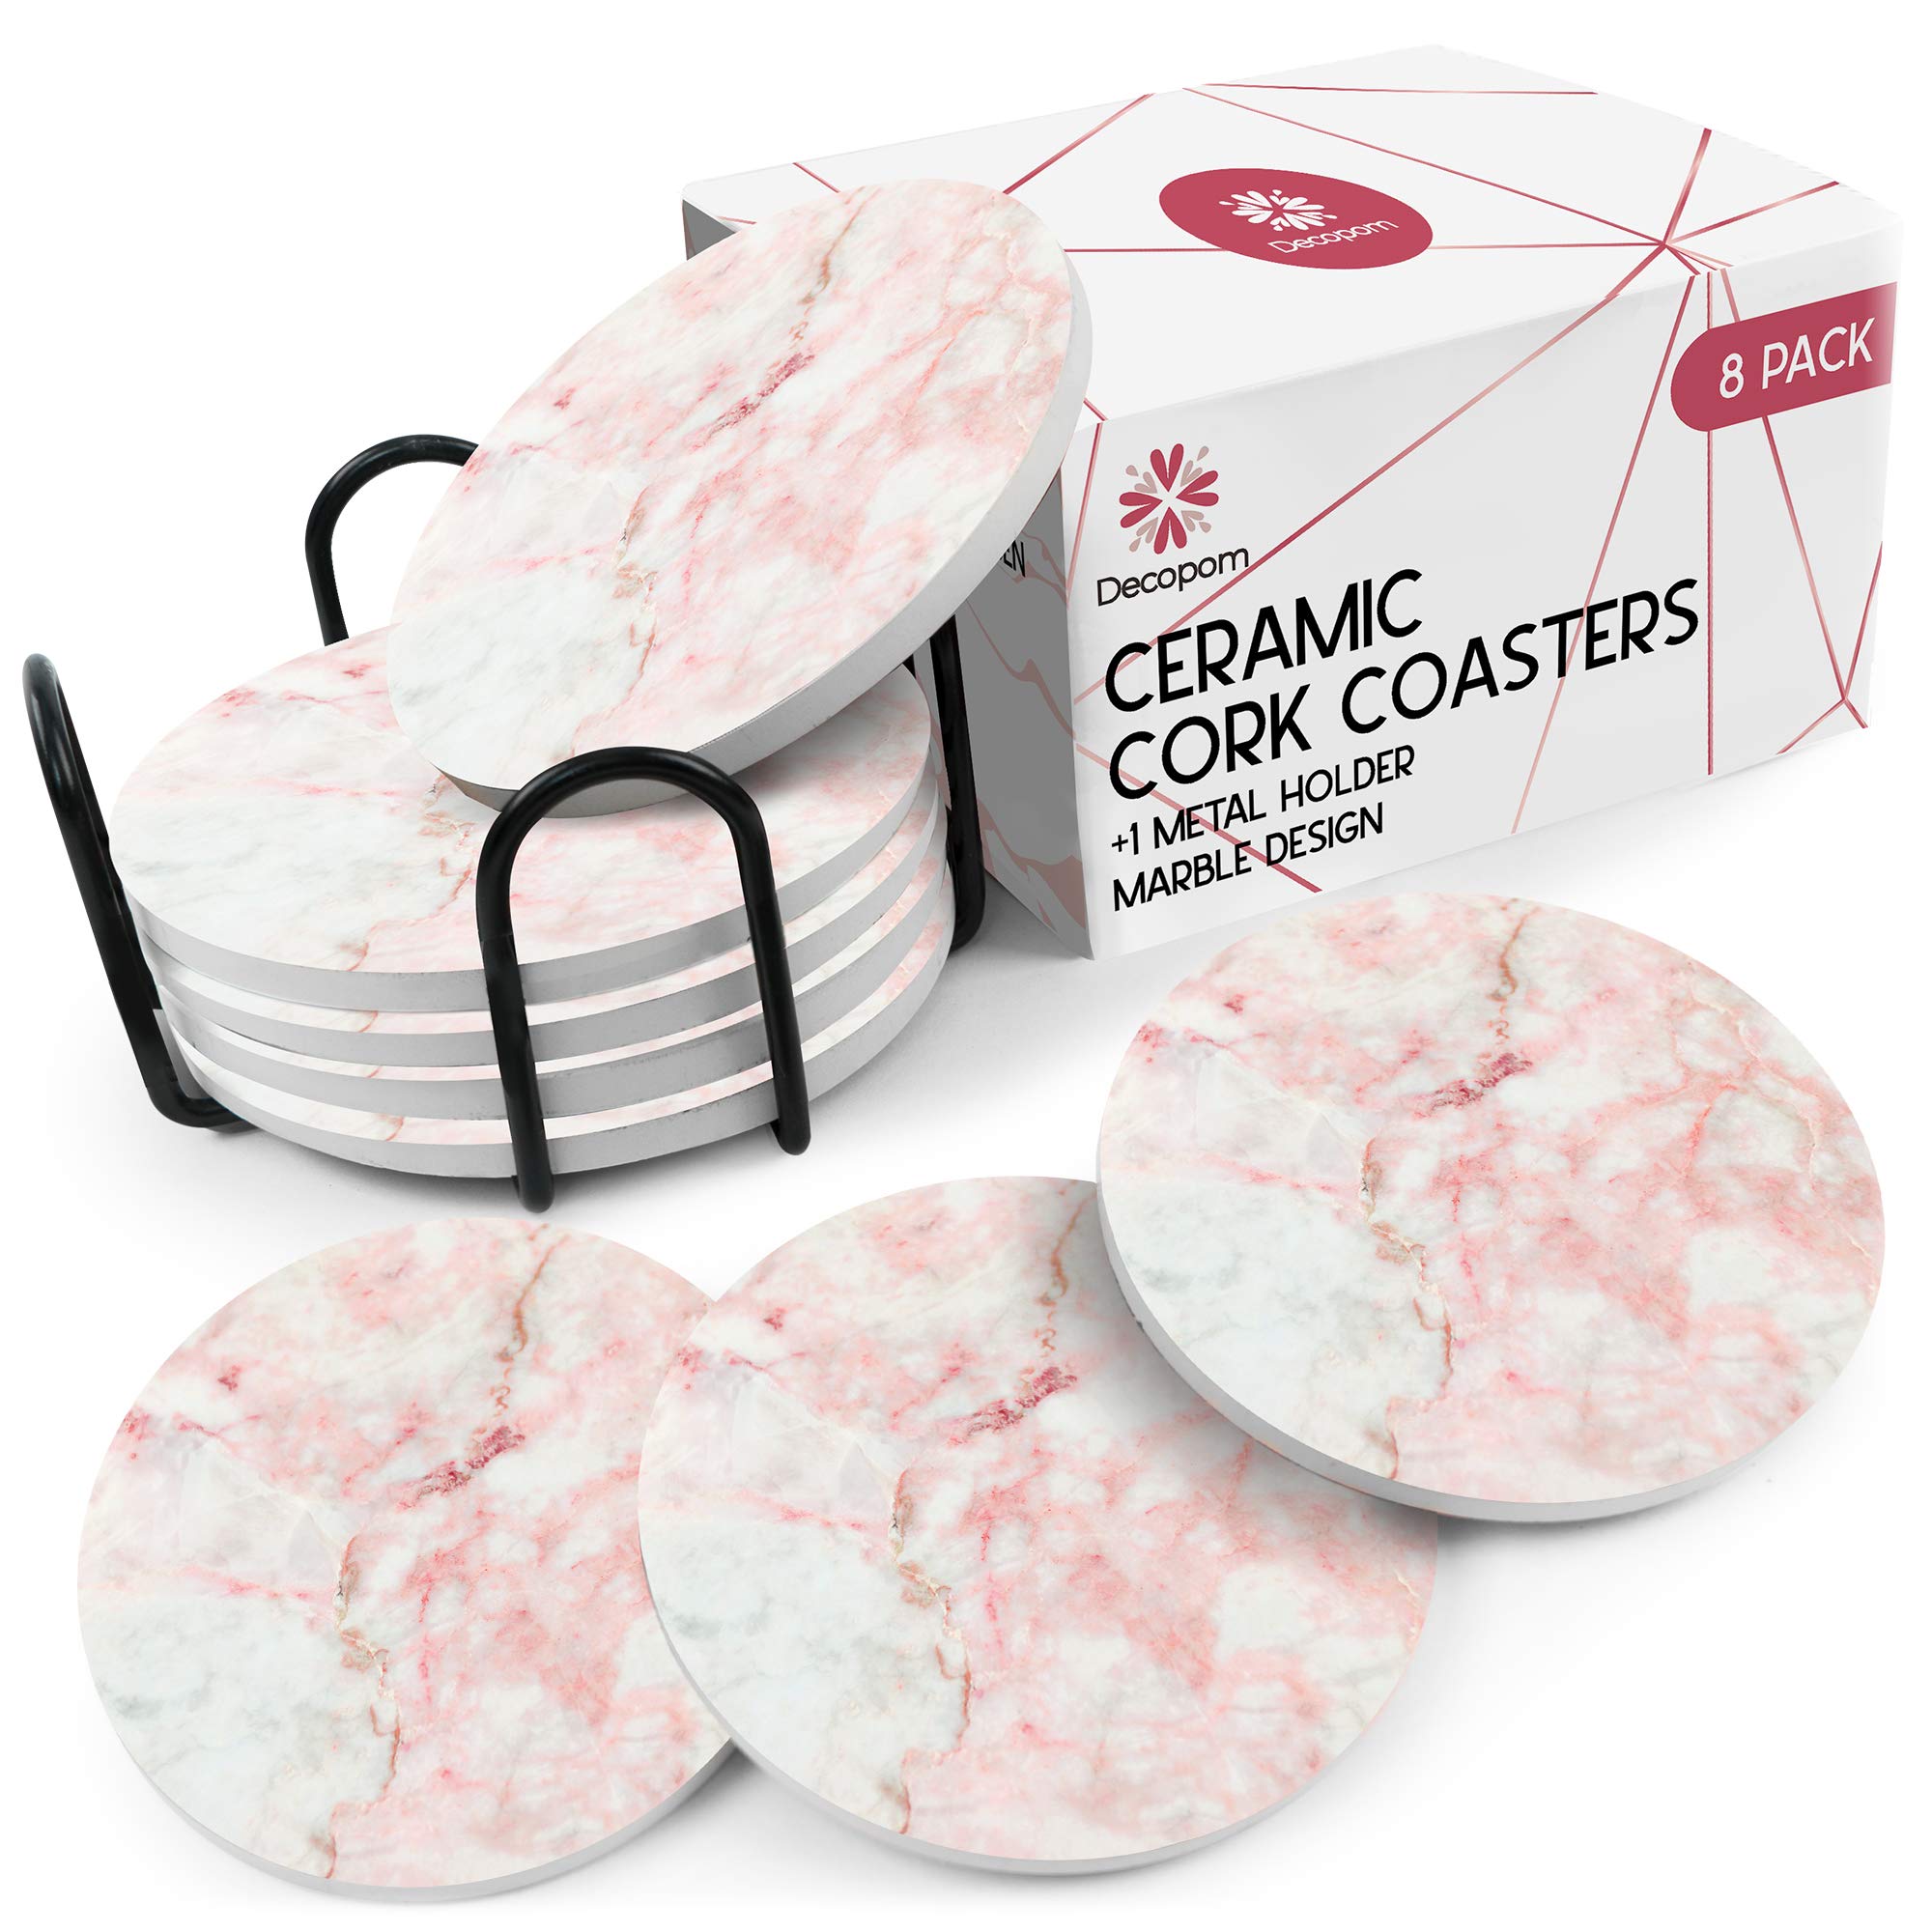 Coasters for Drinks Ceramic Cork Set - 8 Pcs Absorbent Rose Marble Design Coasters with Metal Holder for Cups Mugs Coffee Wine Wooden Glass Tabletop Protection Bar Table House Warming Gift Home  - Like New